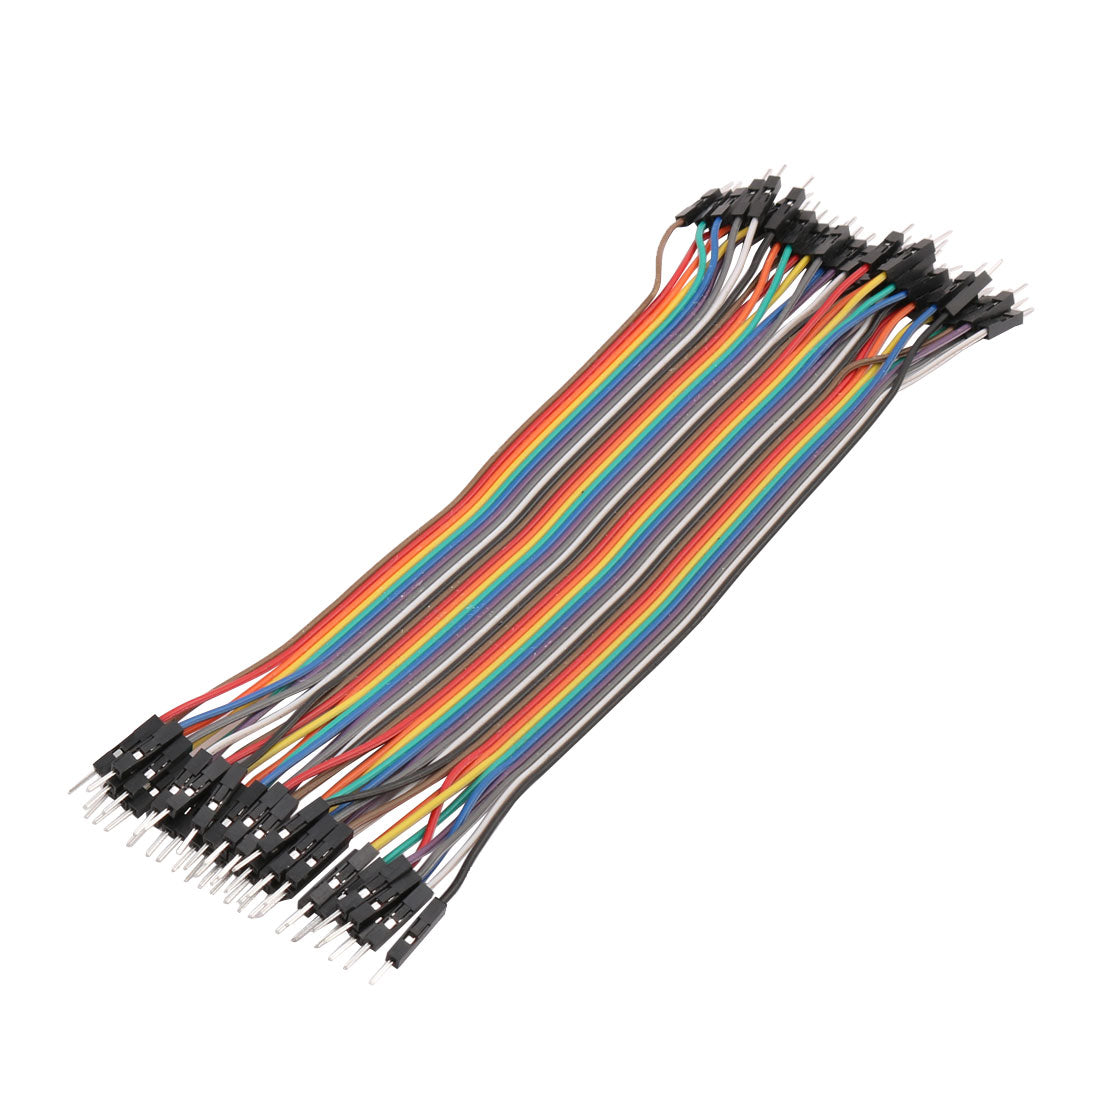 Uxcell Uxcell 40Pin 21cm Male to Male Jumper Cable Wire 2.54mm Pin Pitch